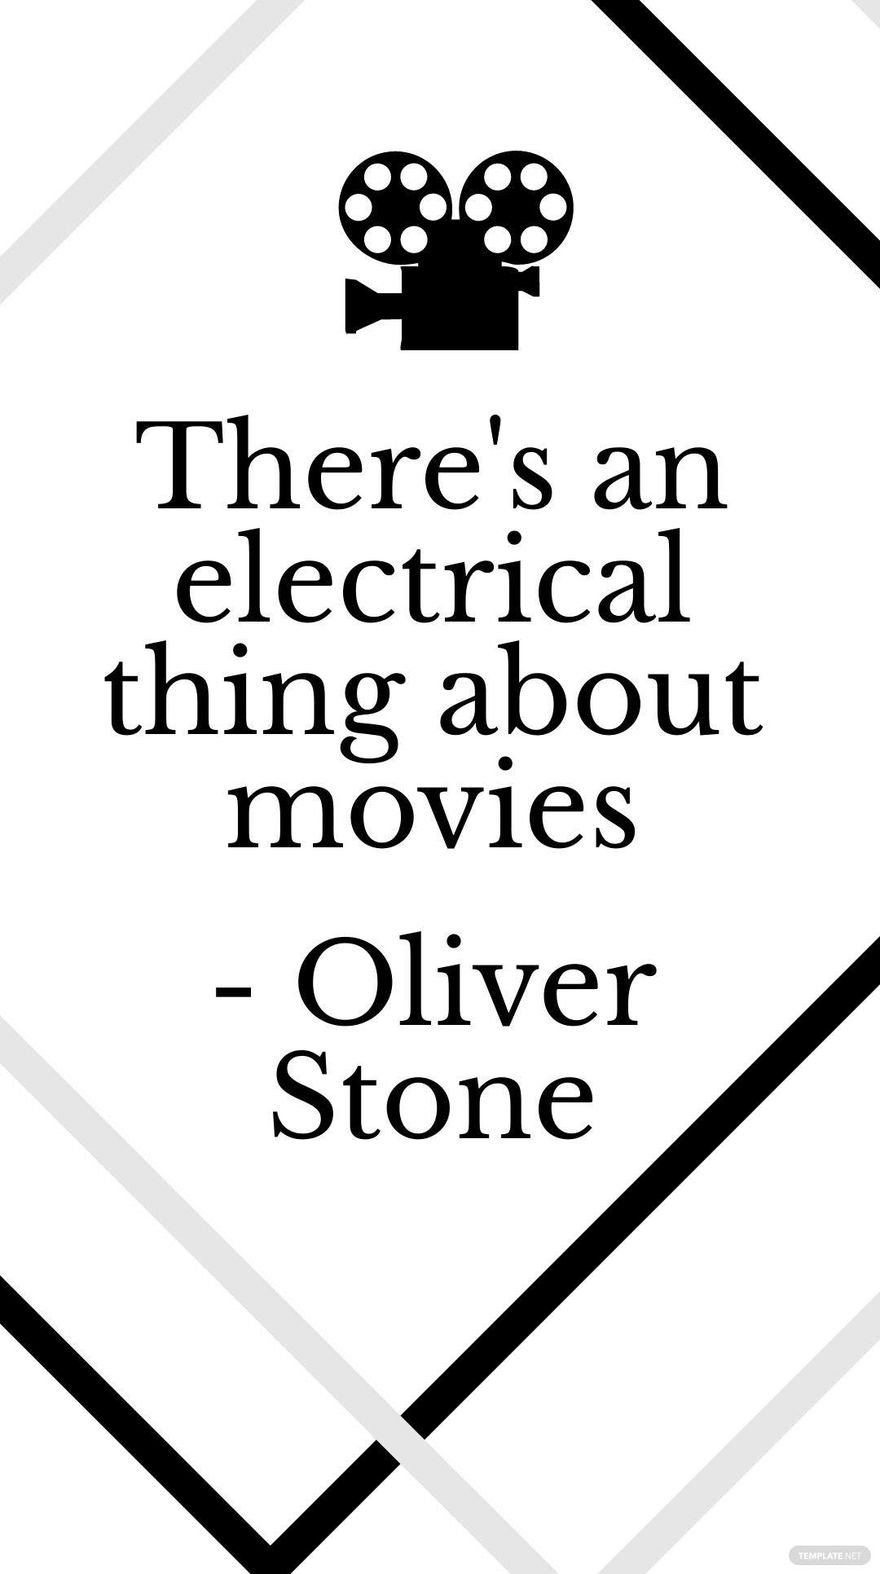 Oliver Stone - There's an electrical thing about movies